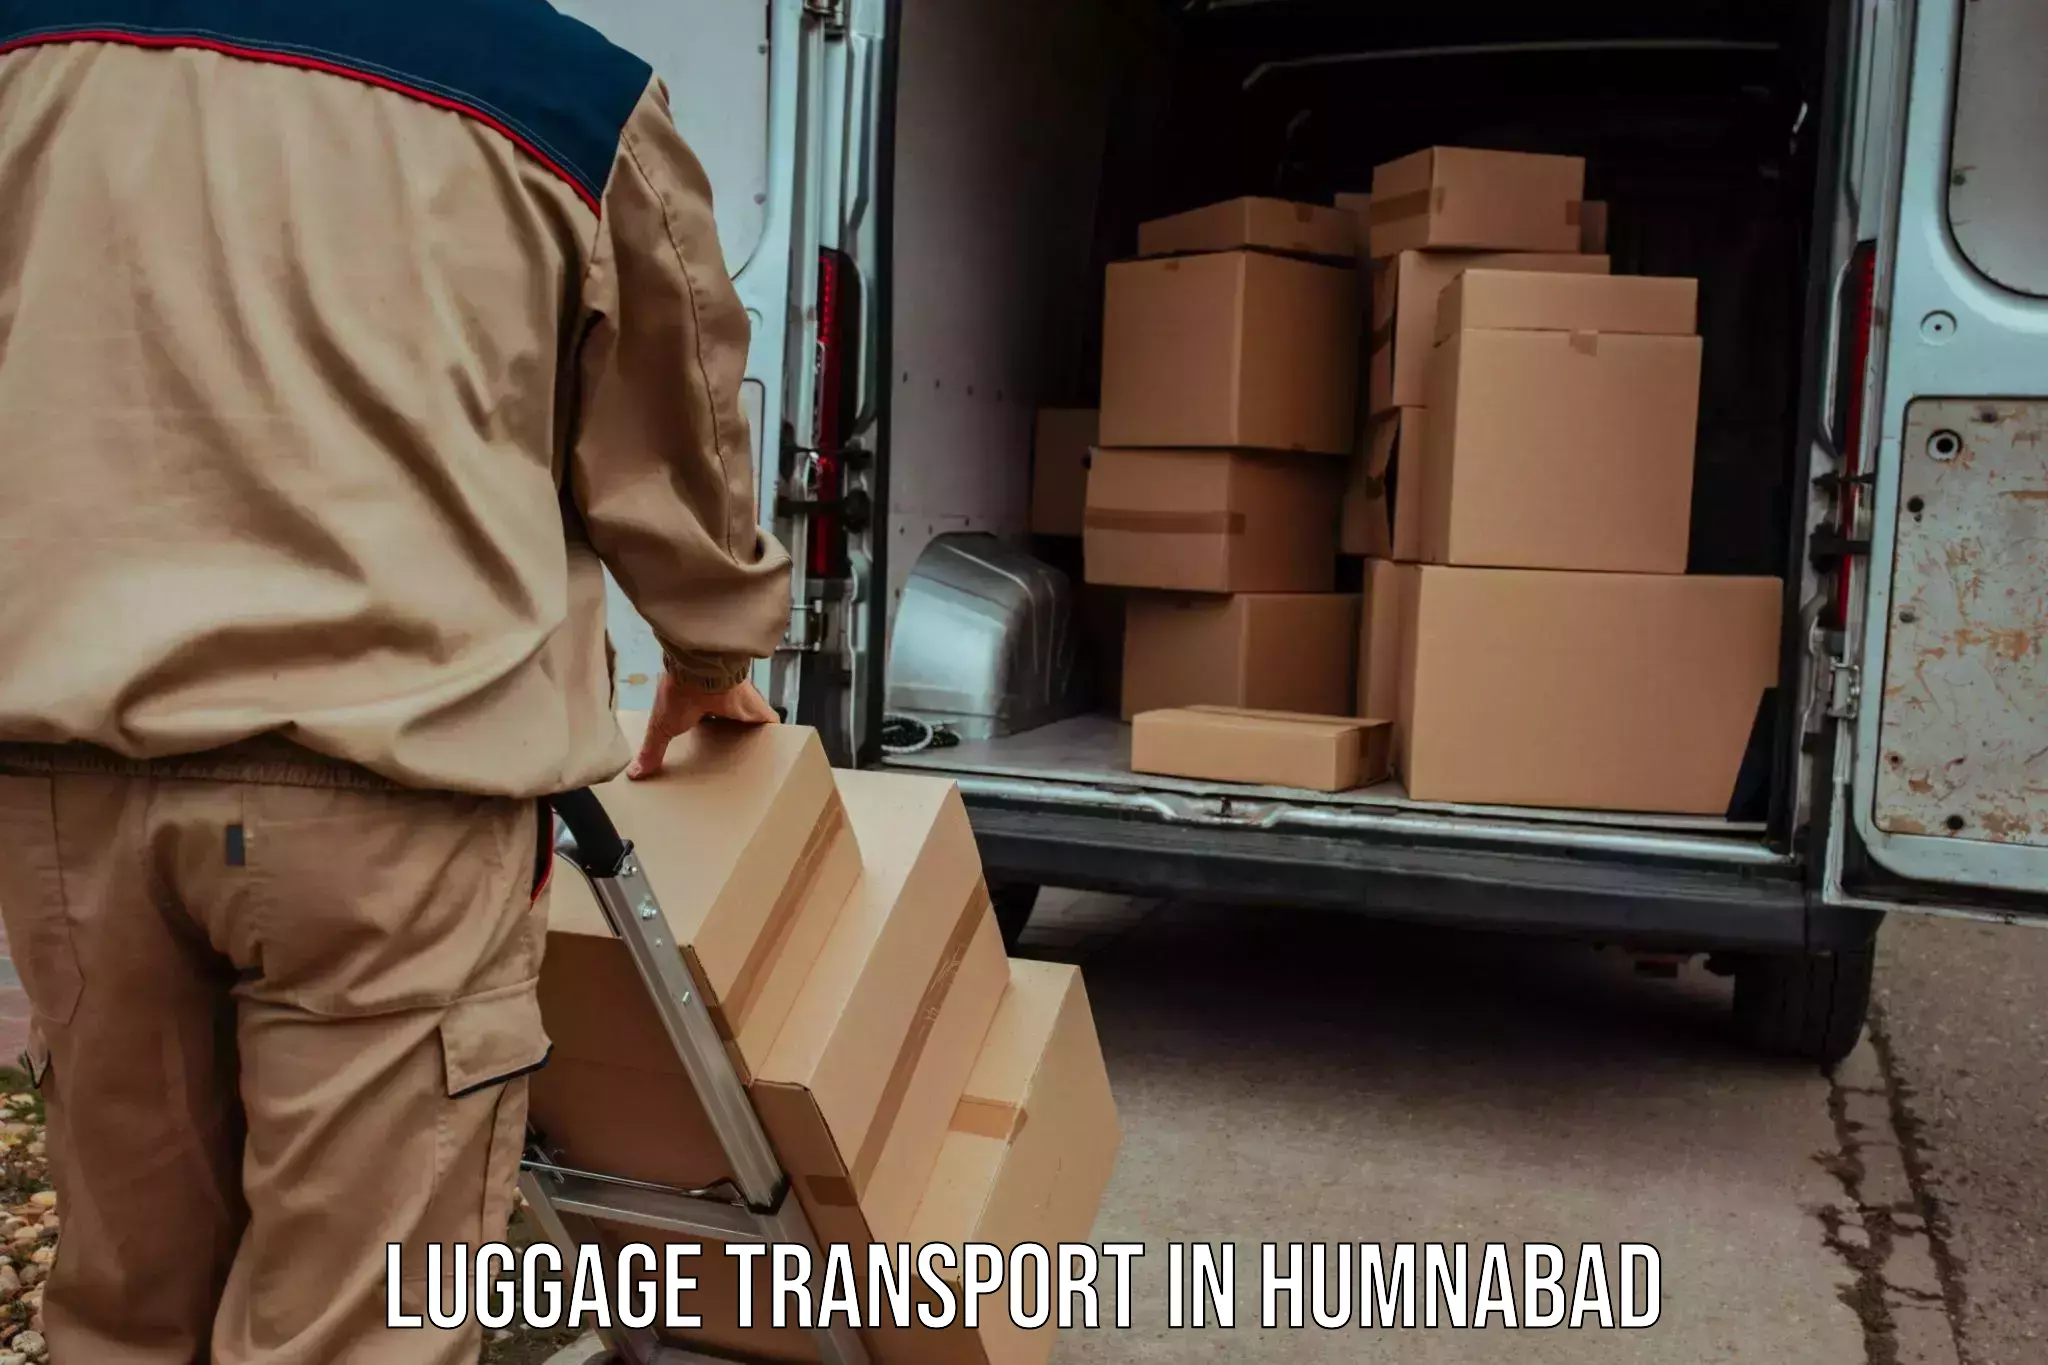 Luggage transport tips in Humnabad